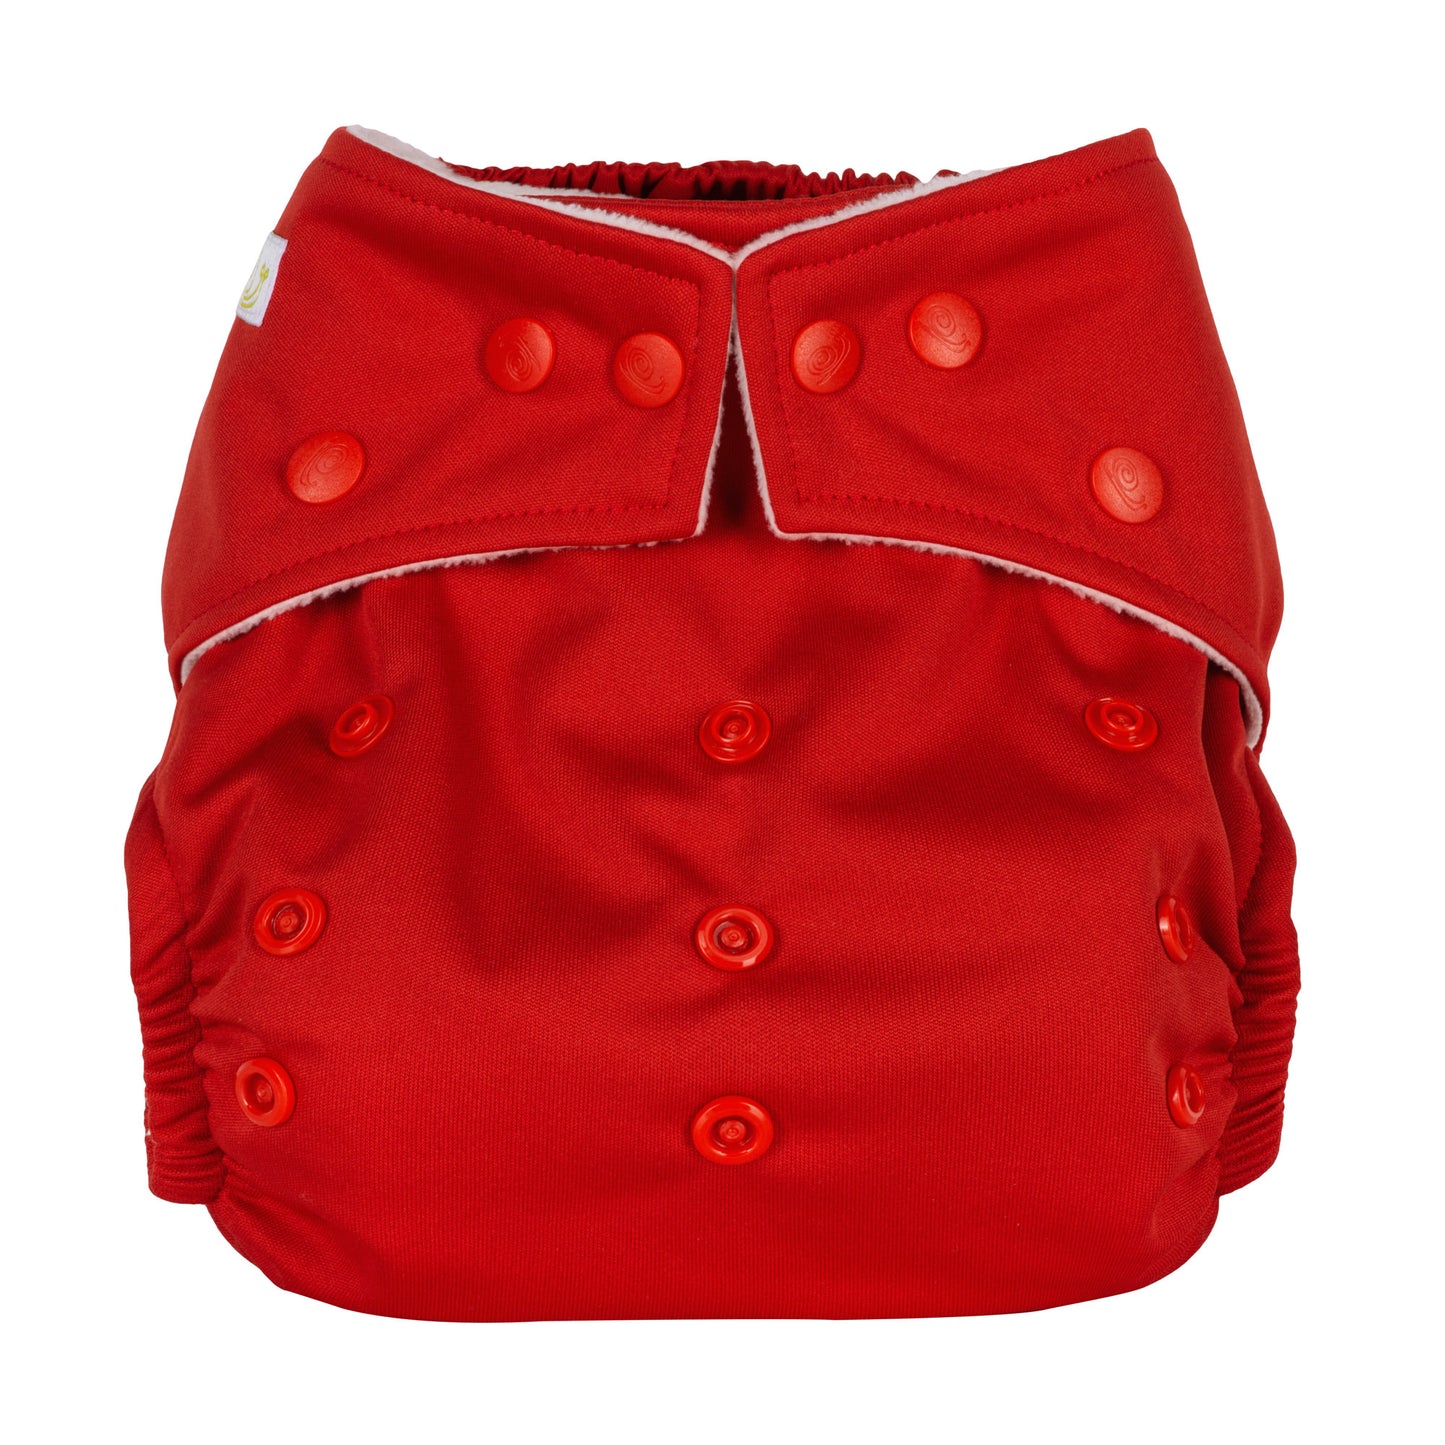 Red reusable cloth nappy with poppers around the waist and rise snaps across the front. 